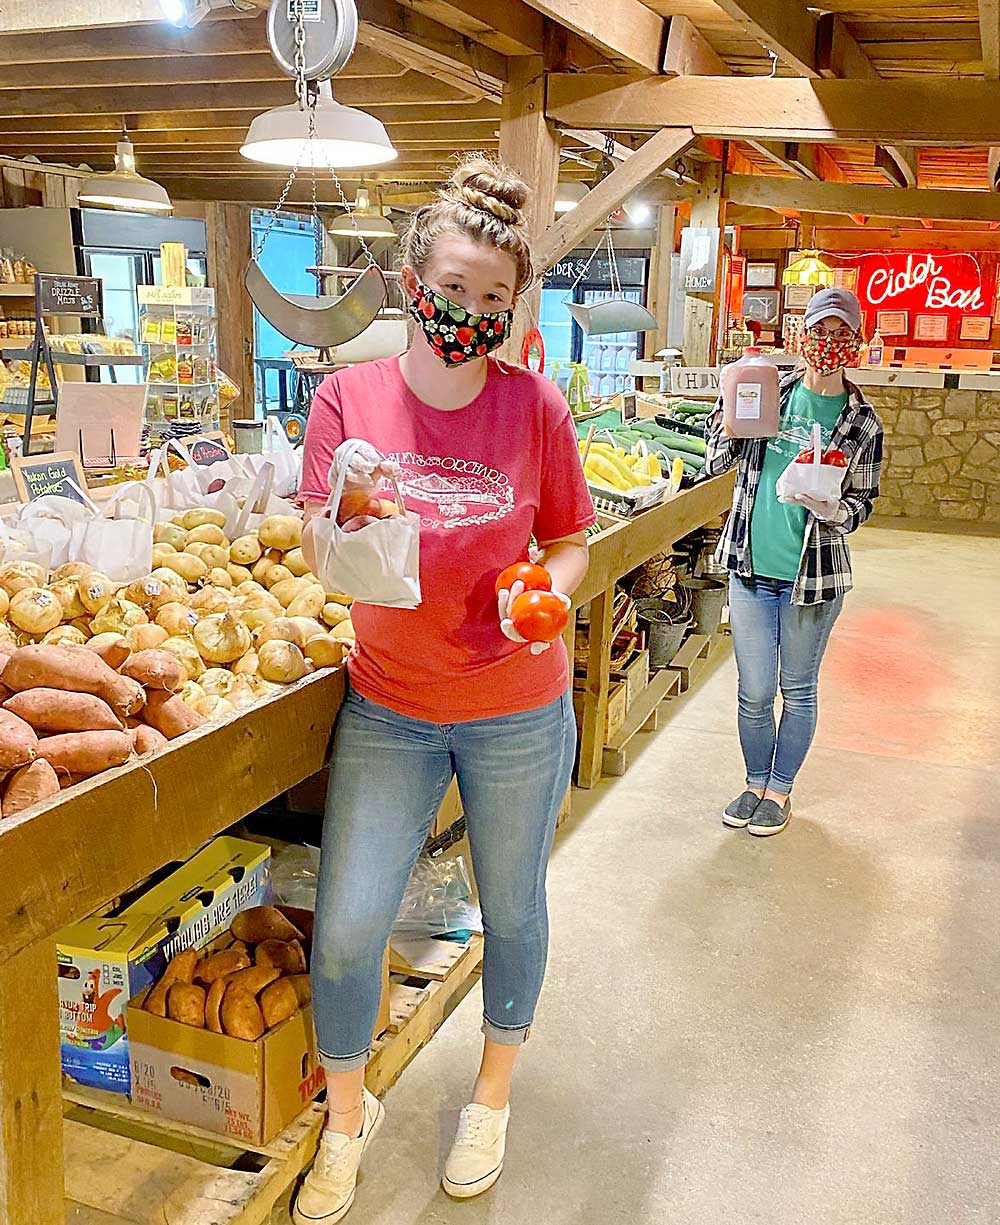 Employees at Beasley’s Orchard, a farm market near Indianapolis, Indiana, wore masks last fall, just one of the many changes forced on farm markets during the coronavirus pandemic. (Courtesy Calvin Beasley/Beasley’s Orchard)